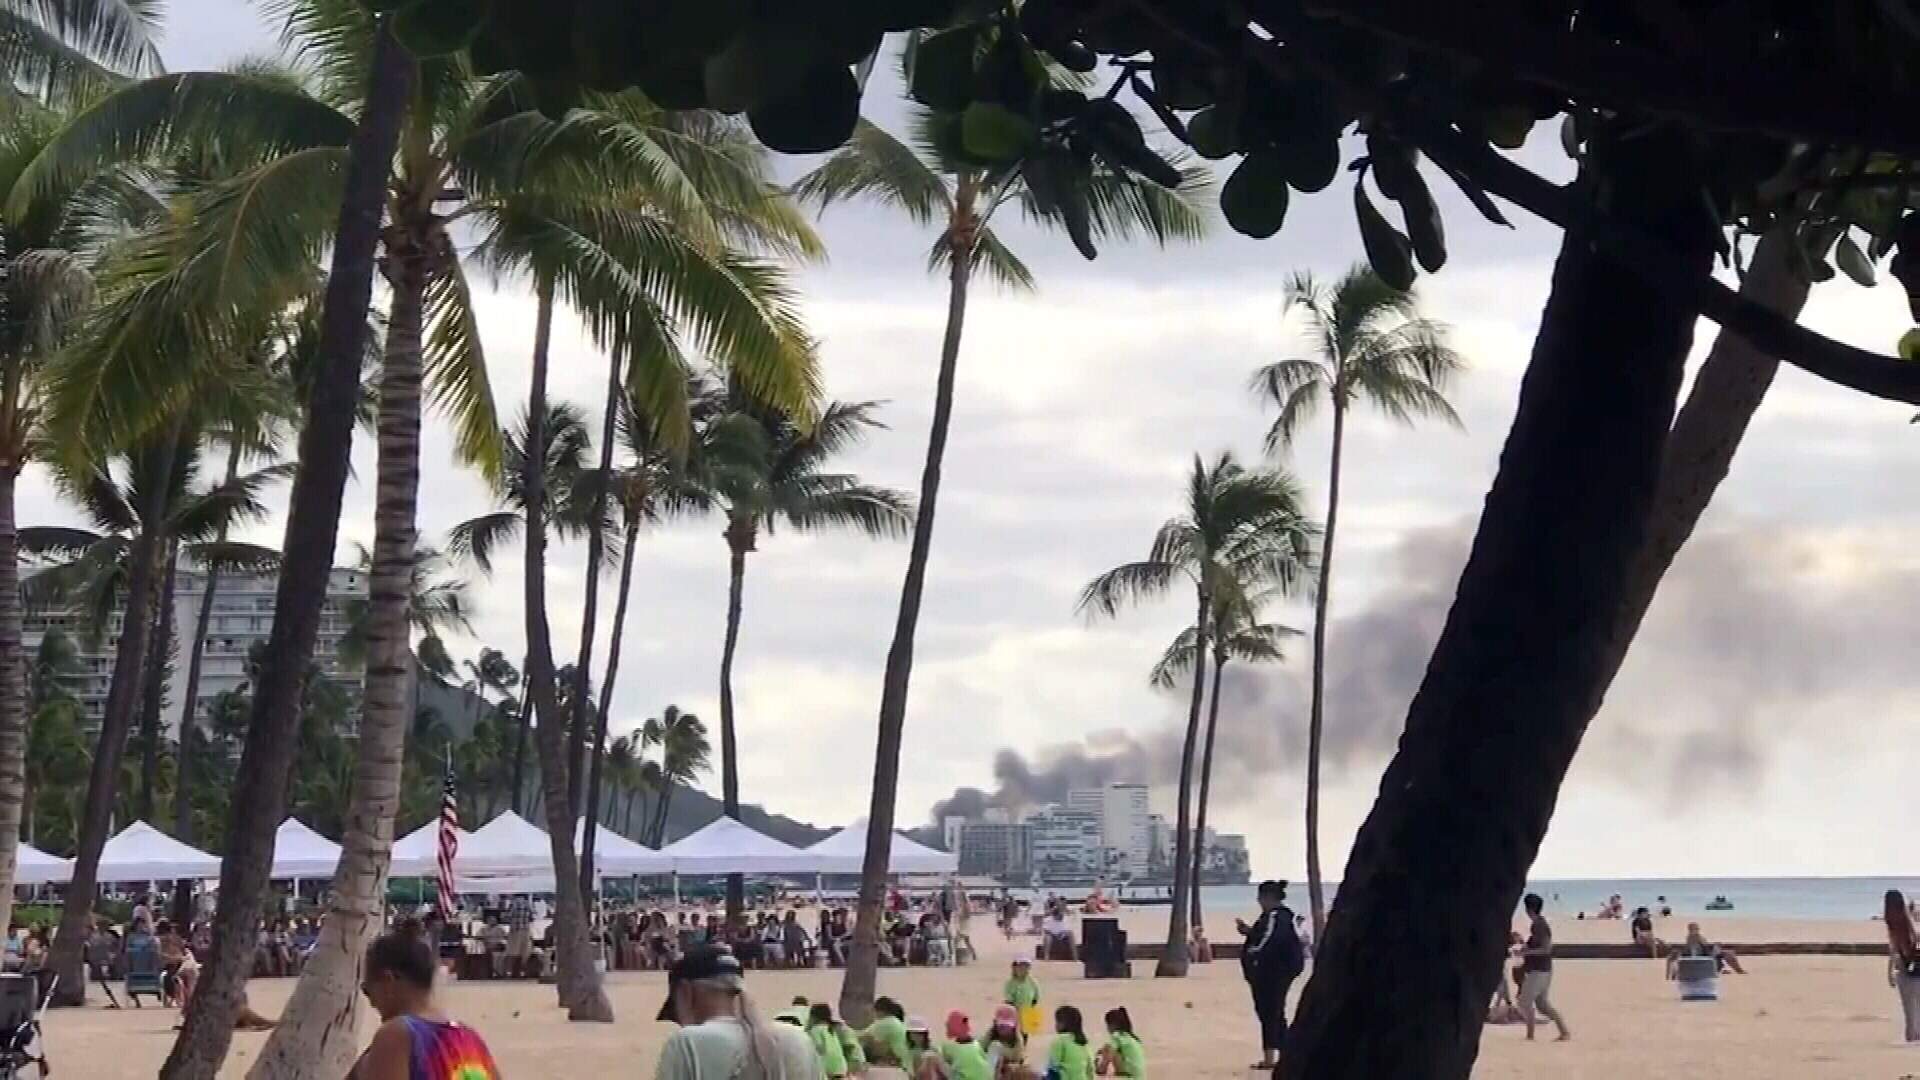 Smoke can be seen billowing from the area where an active shooter incident was unfolding on Monday (local time) in Honolulu, Hawaii.